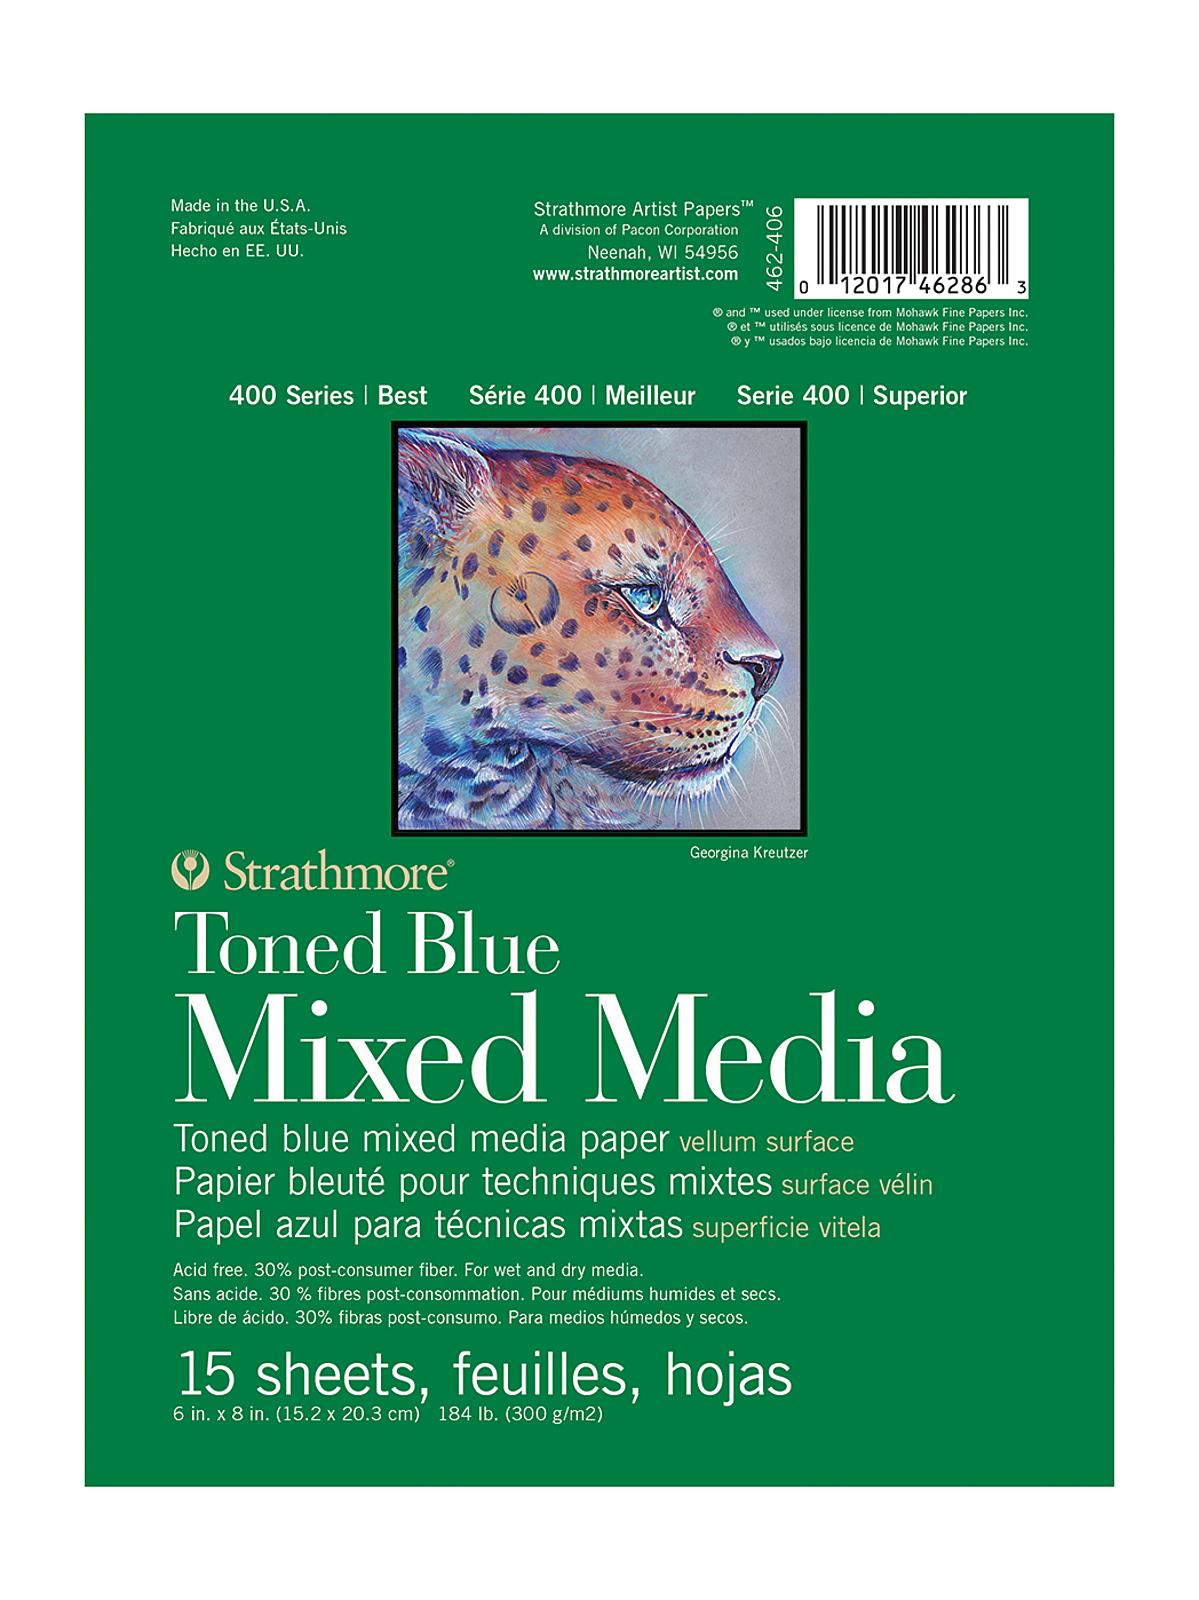 400 Series Toned Mixed Media Pad Blue 6 In. X 8 In. 15 Sheets